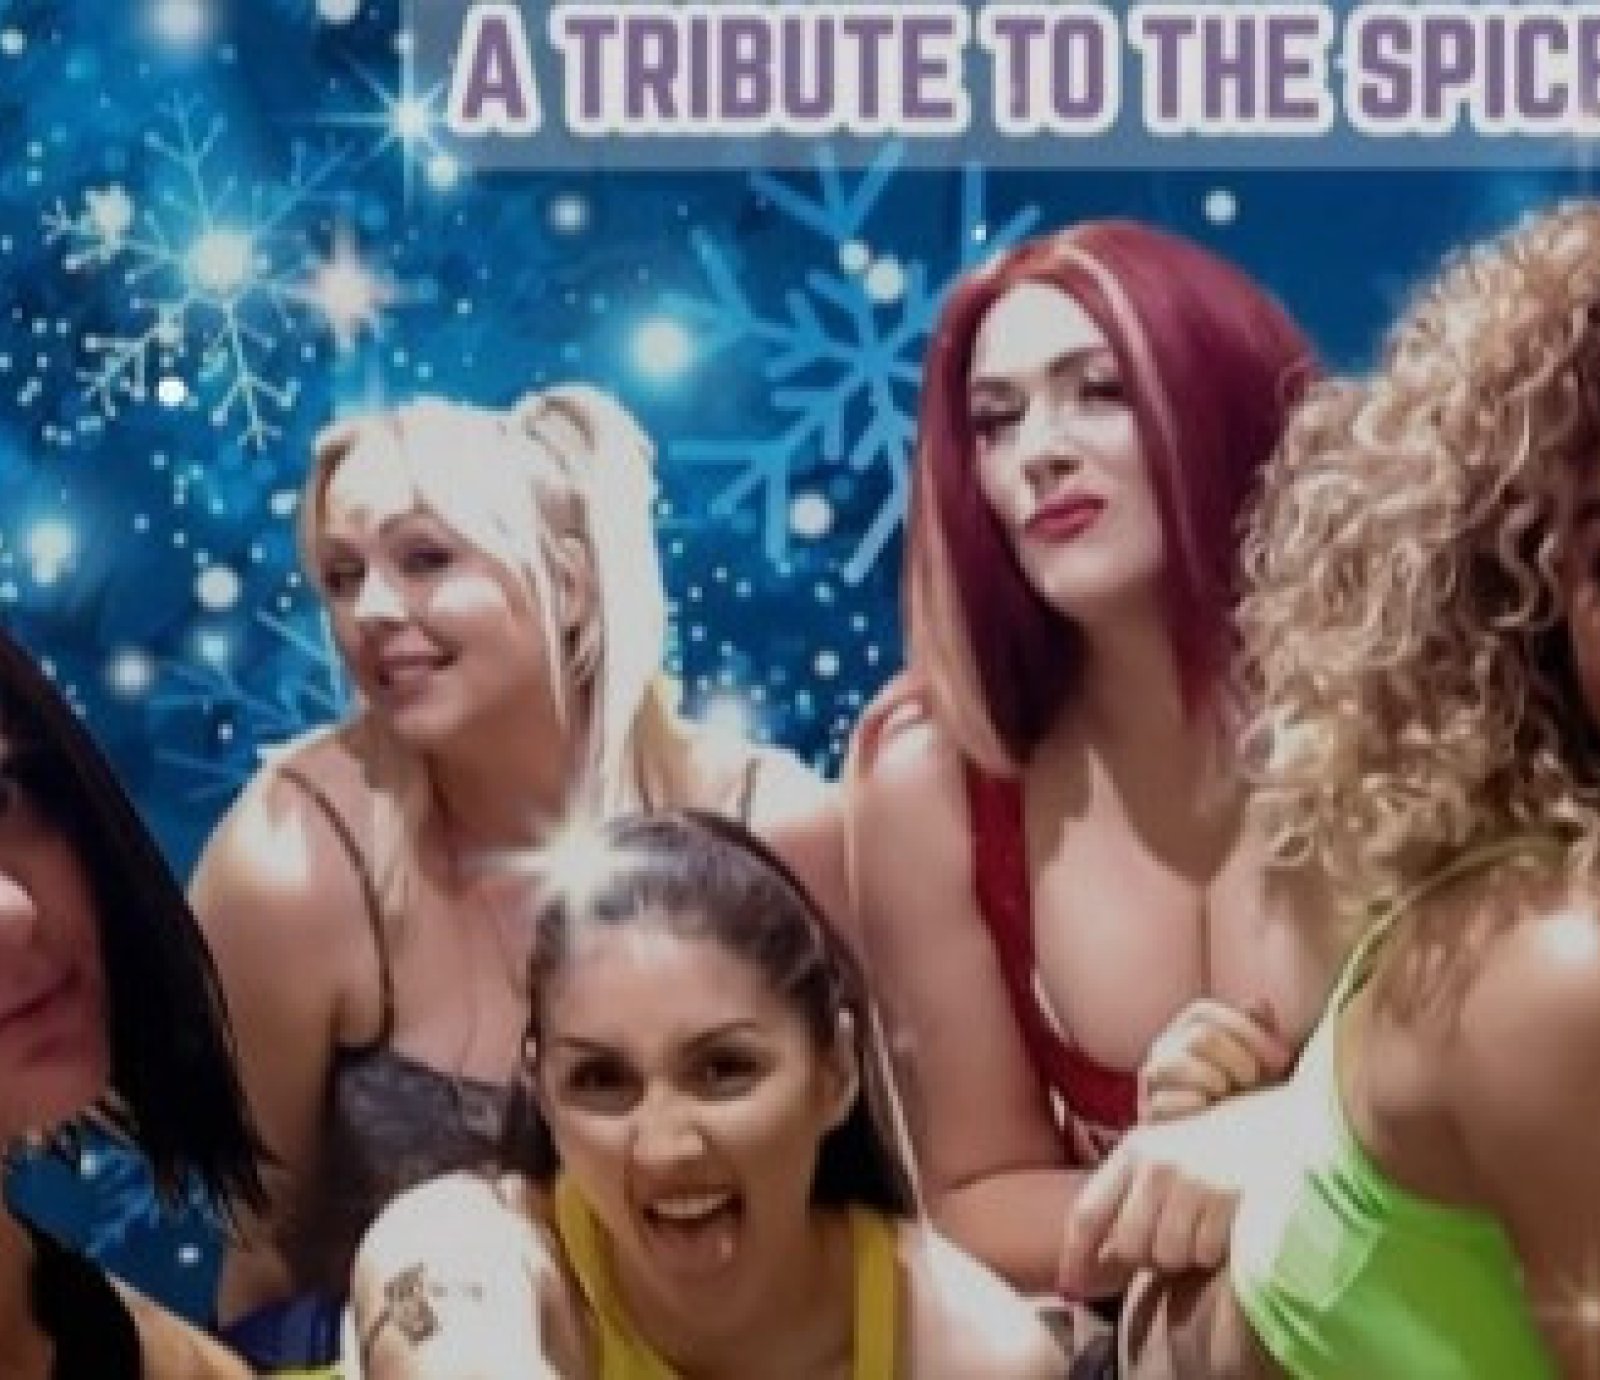 SPICE - The Spice Girls Tribute